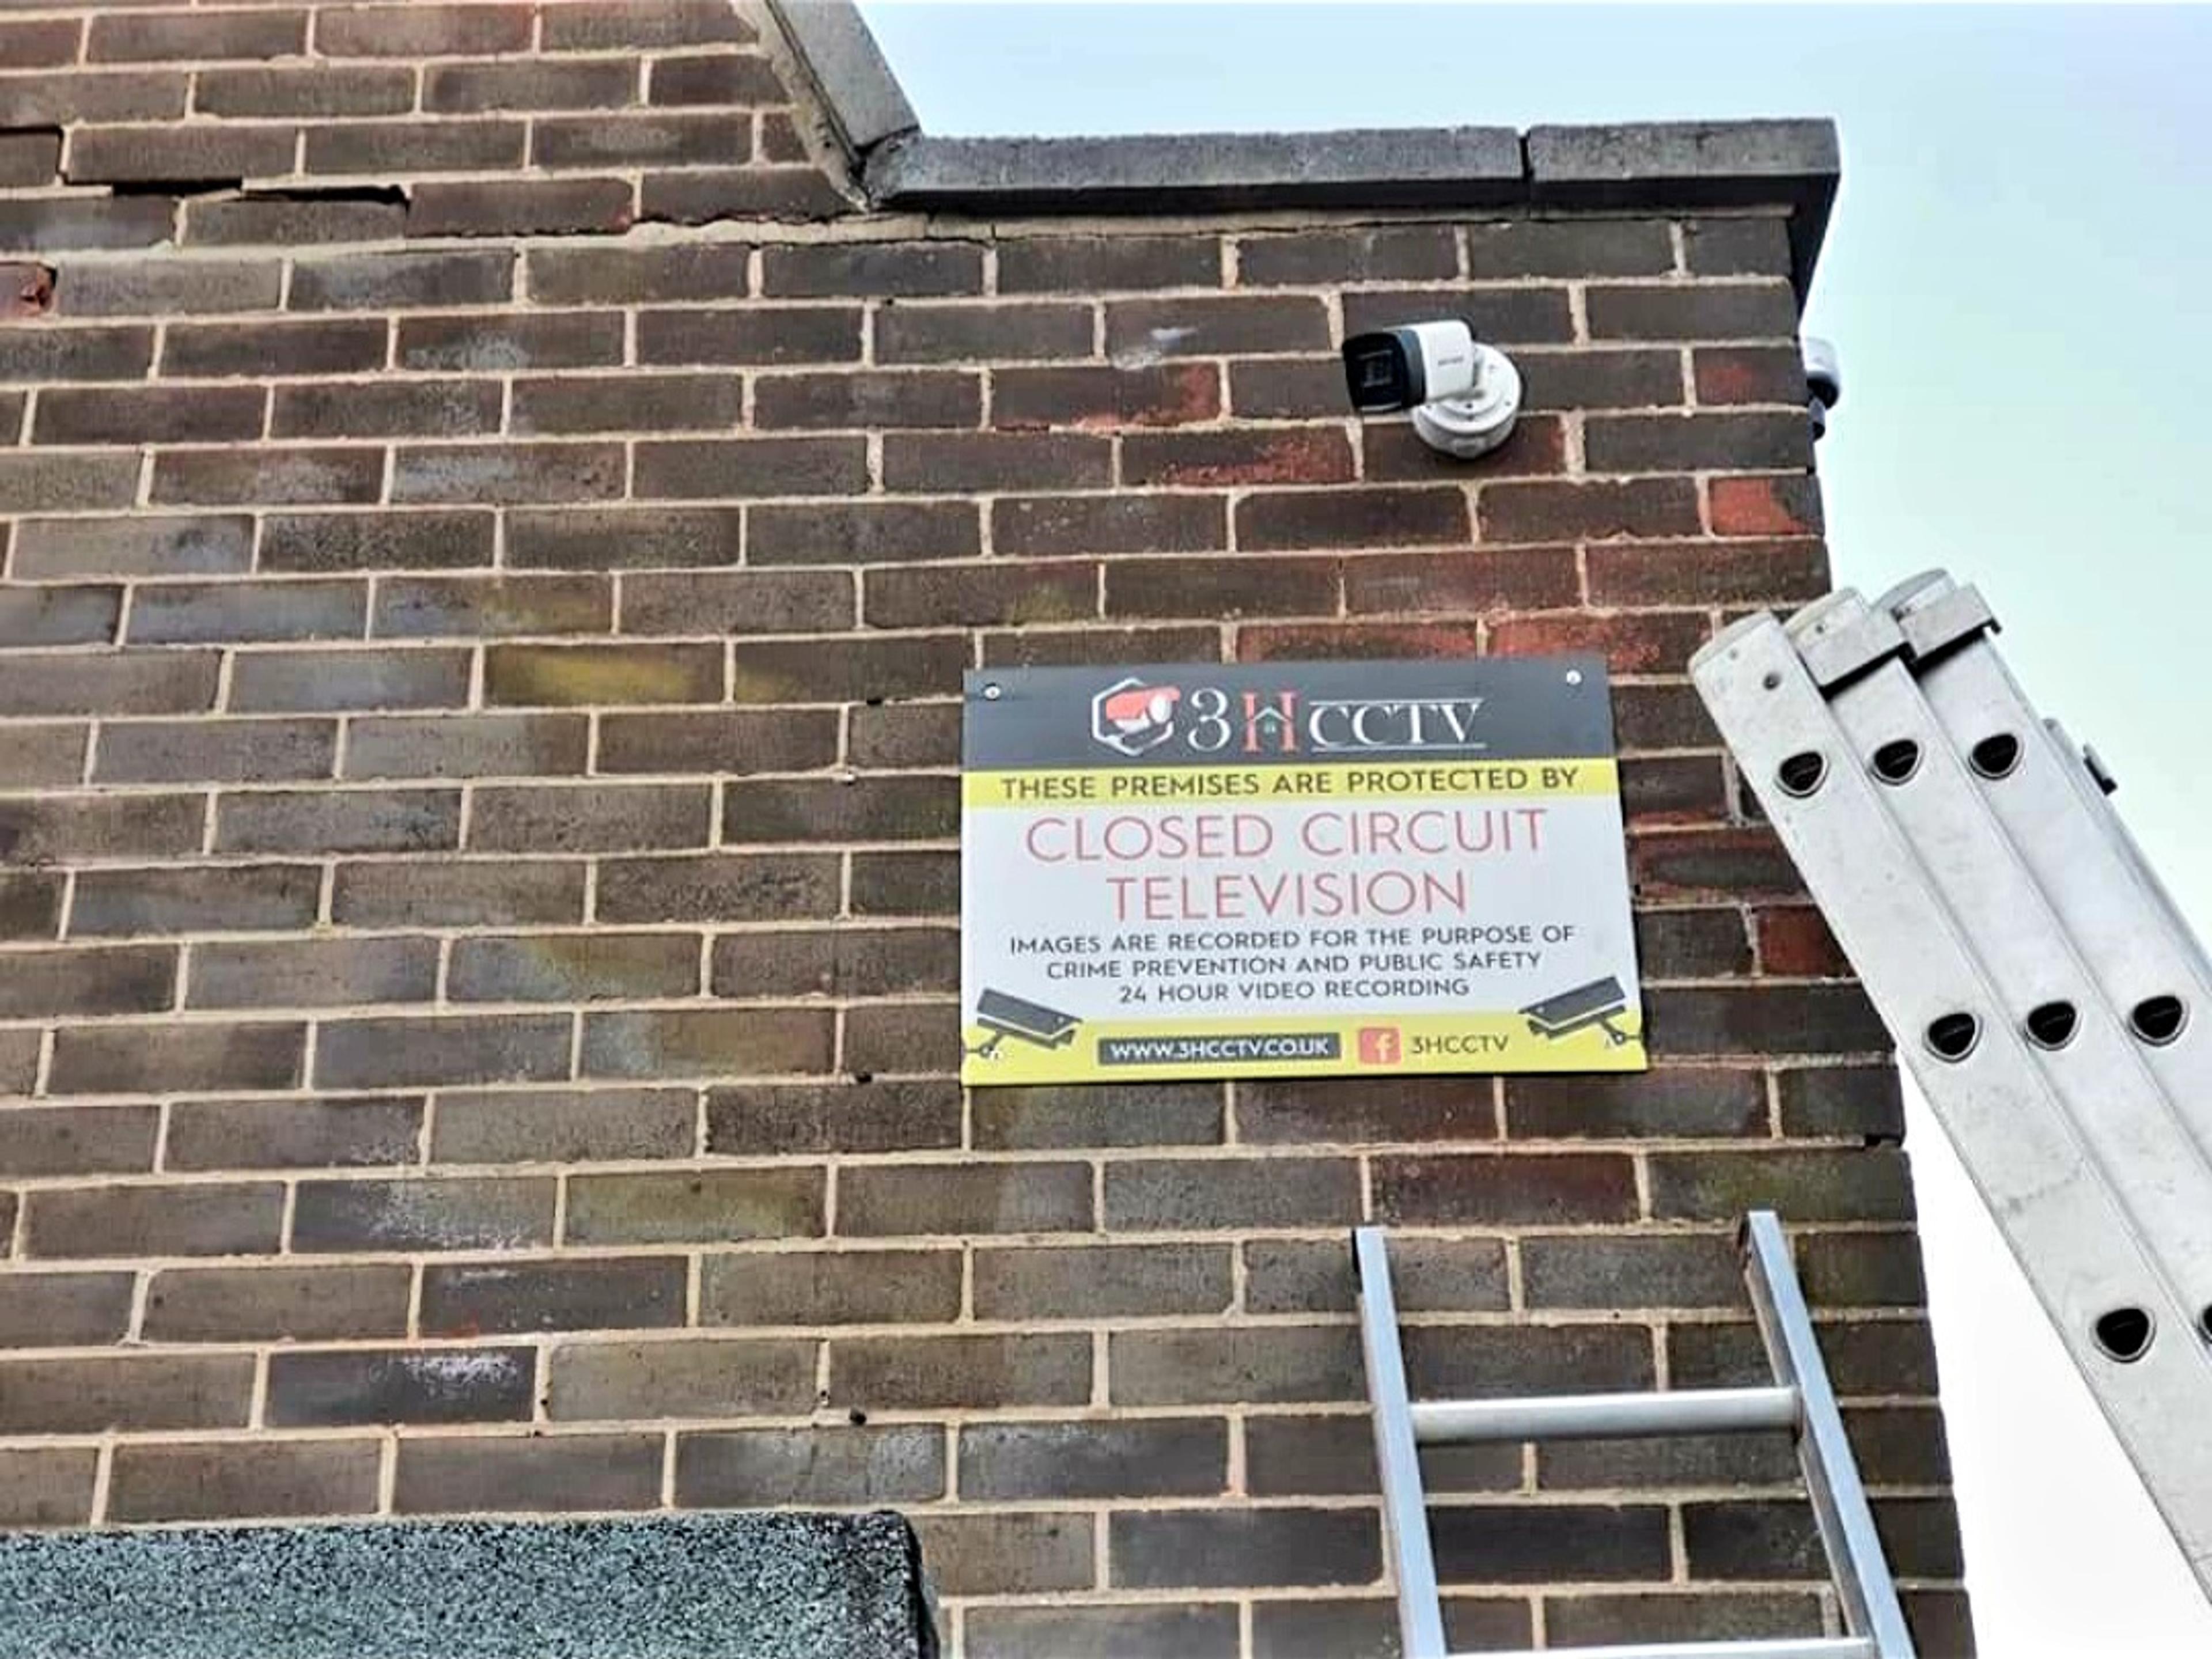 CCTV Installation & Electrical work carried out for a business in Claycross, Chesterfield